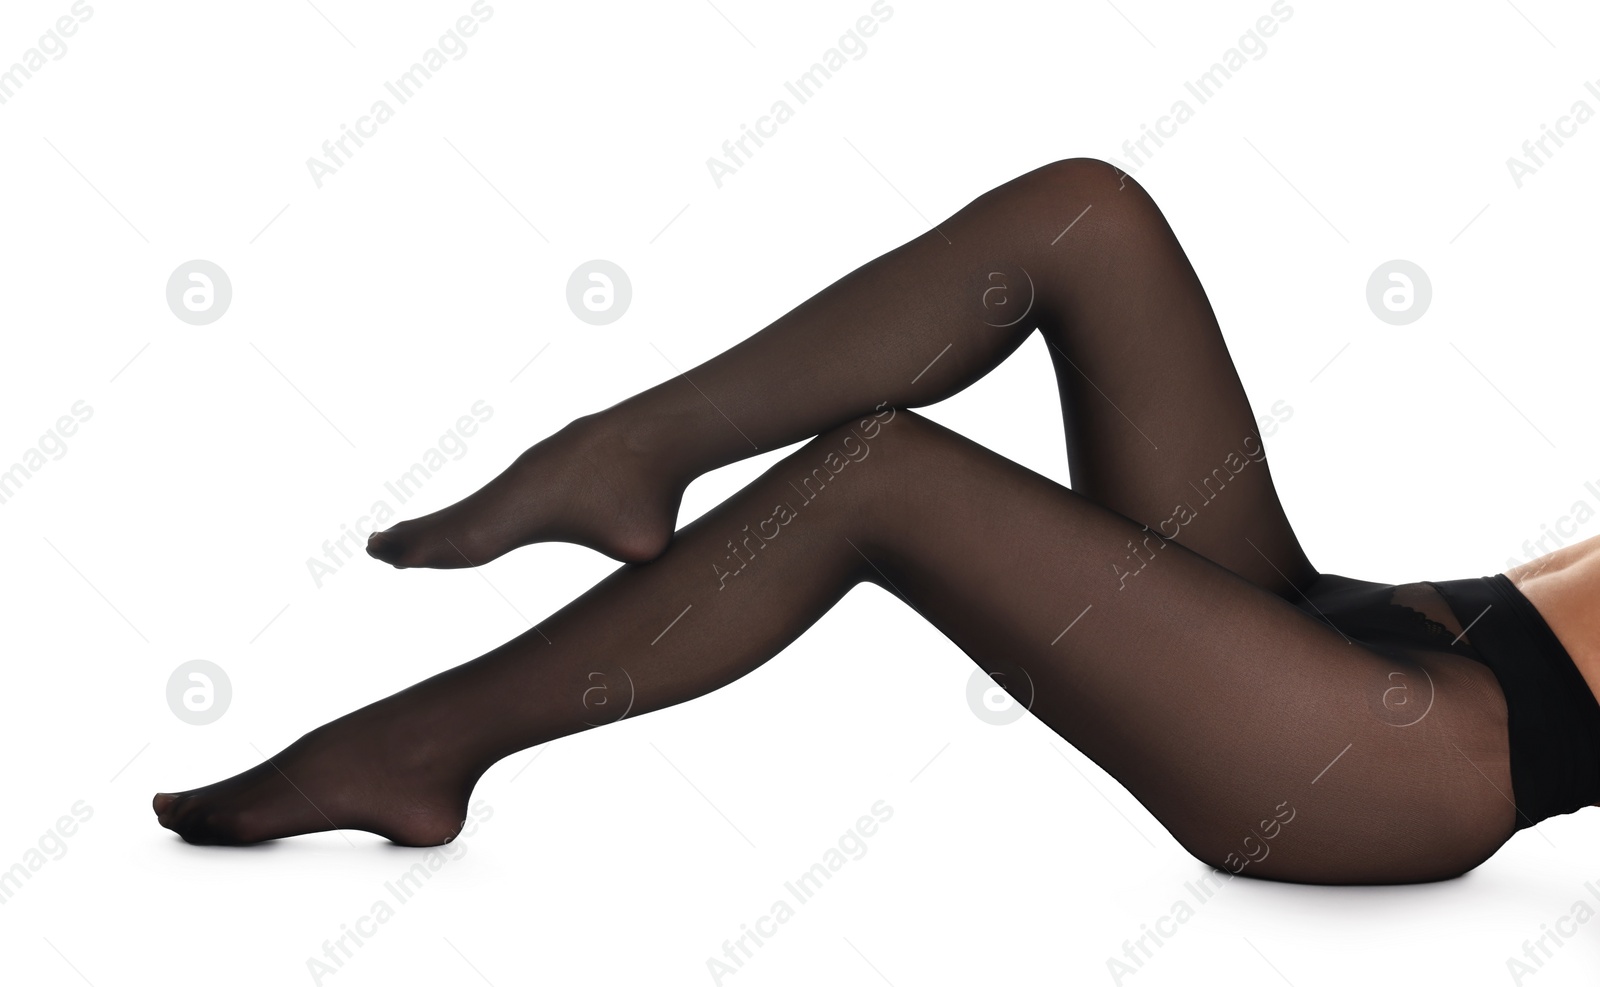 Photo of Woman with beautiful long legs wearing black tights on white background, closeup